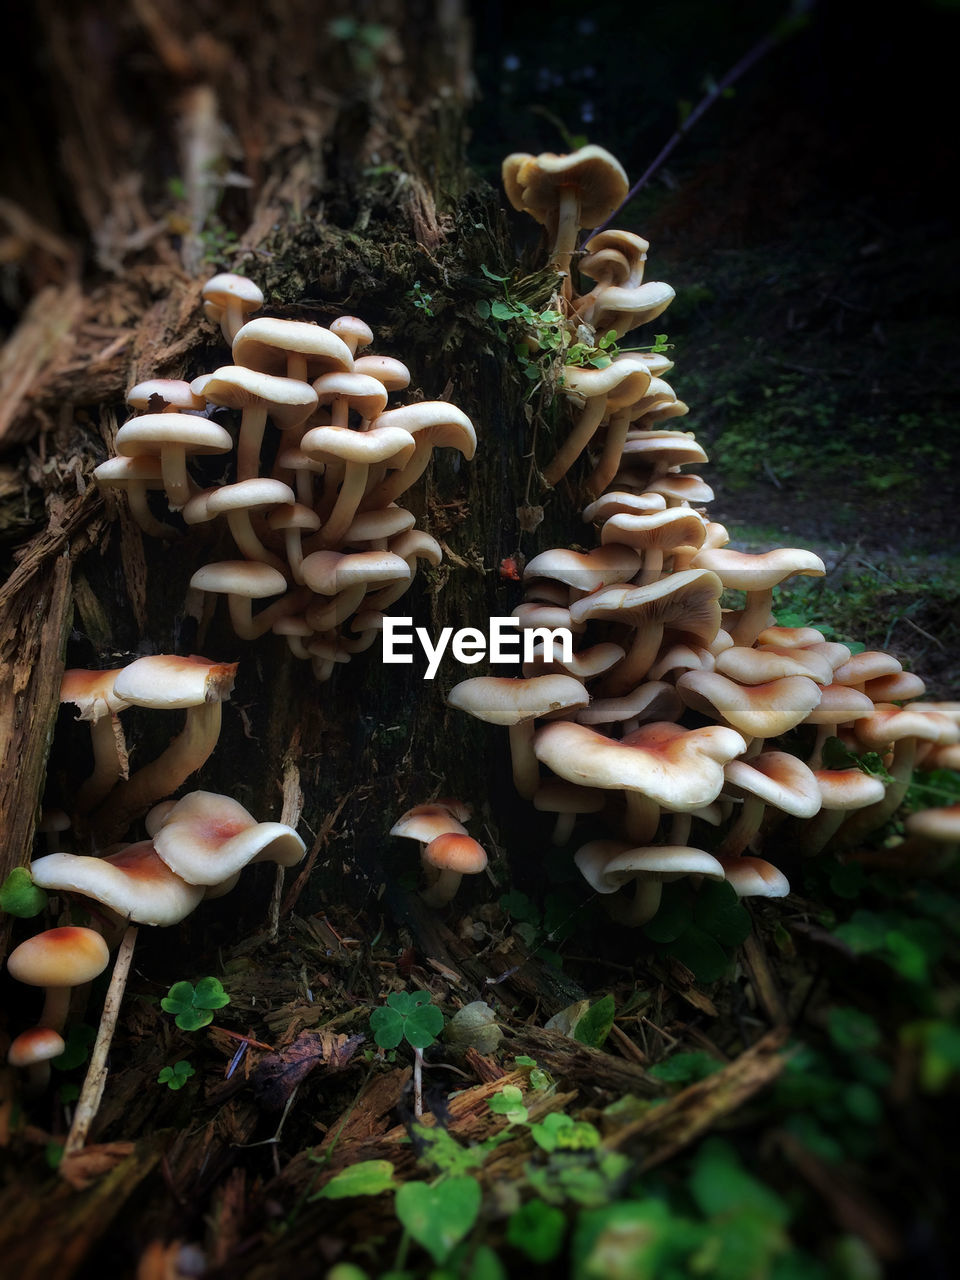 CLOSE-UP OF MUSHROOMS GROWING ON TREE TRUNK IN FOREST